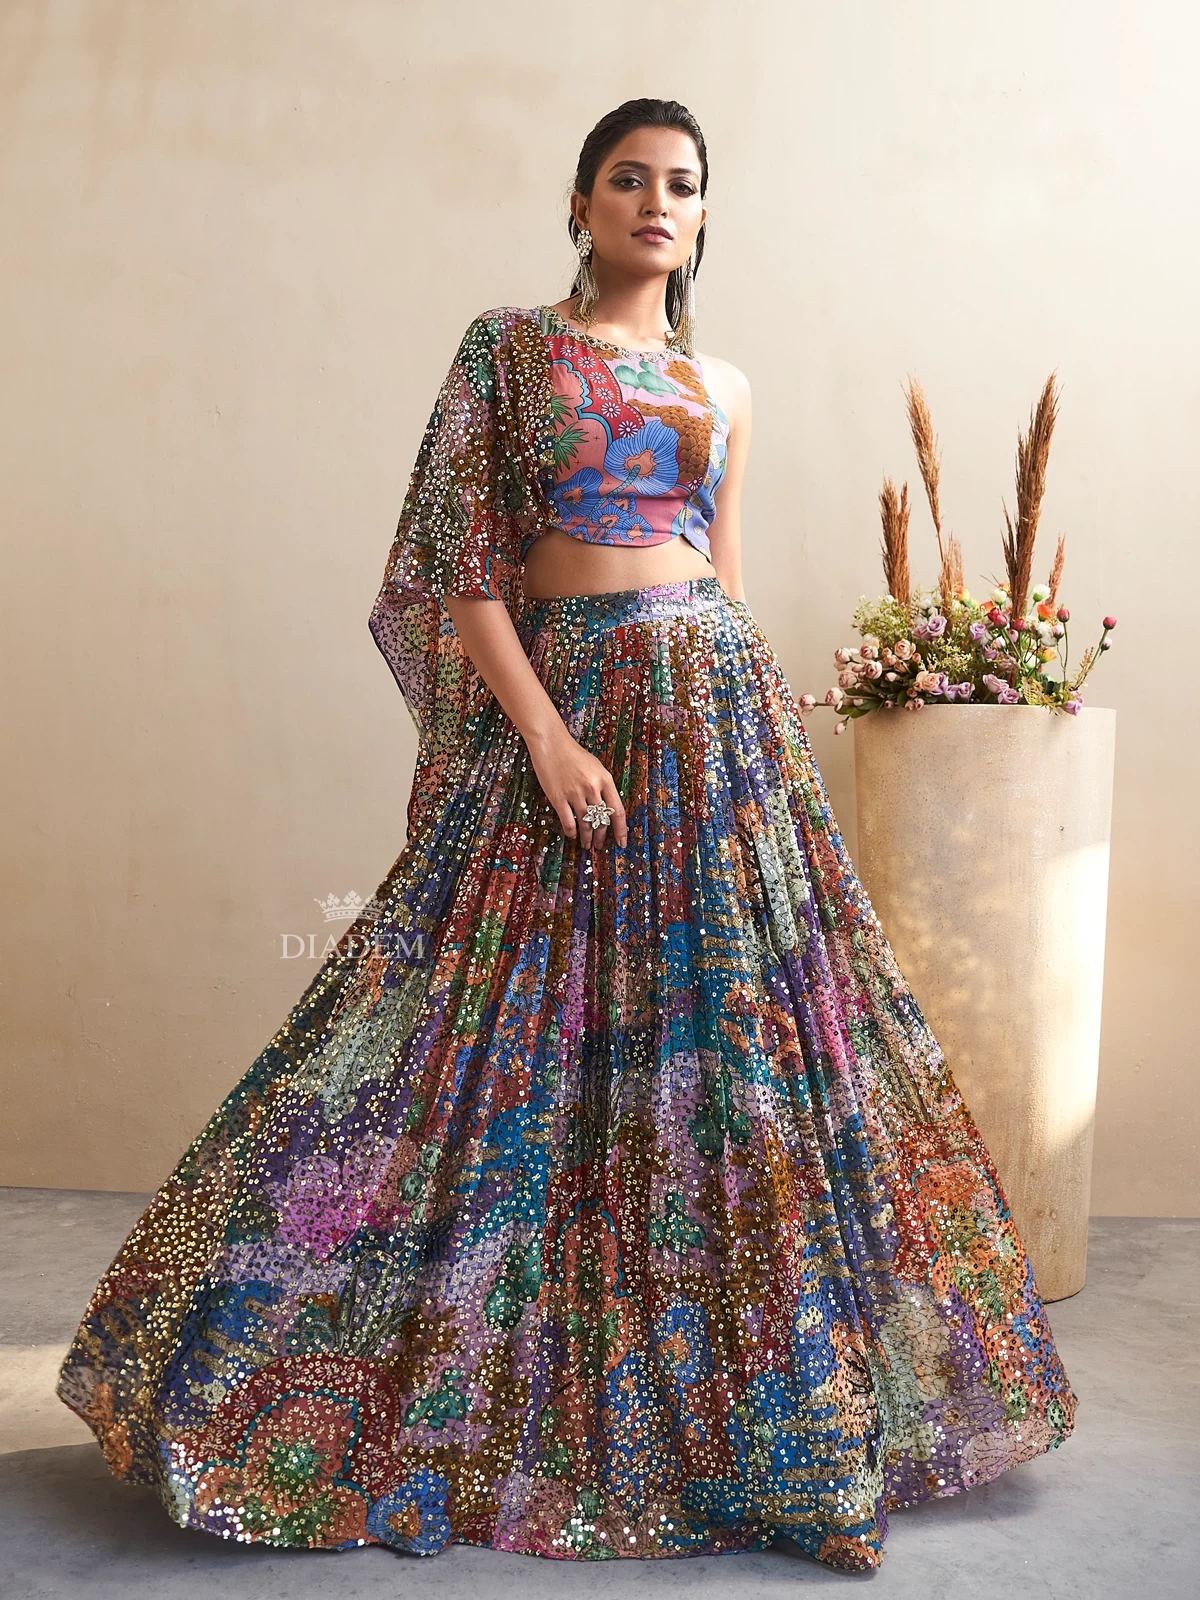 Vibrant Multicolored Chiffon Indo-Western Lehenga with Floral Prints and Sequin Embellishments